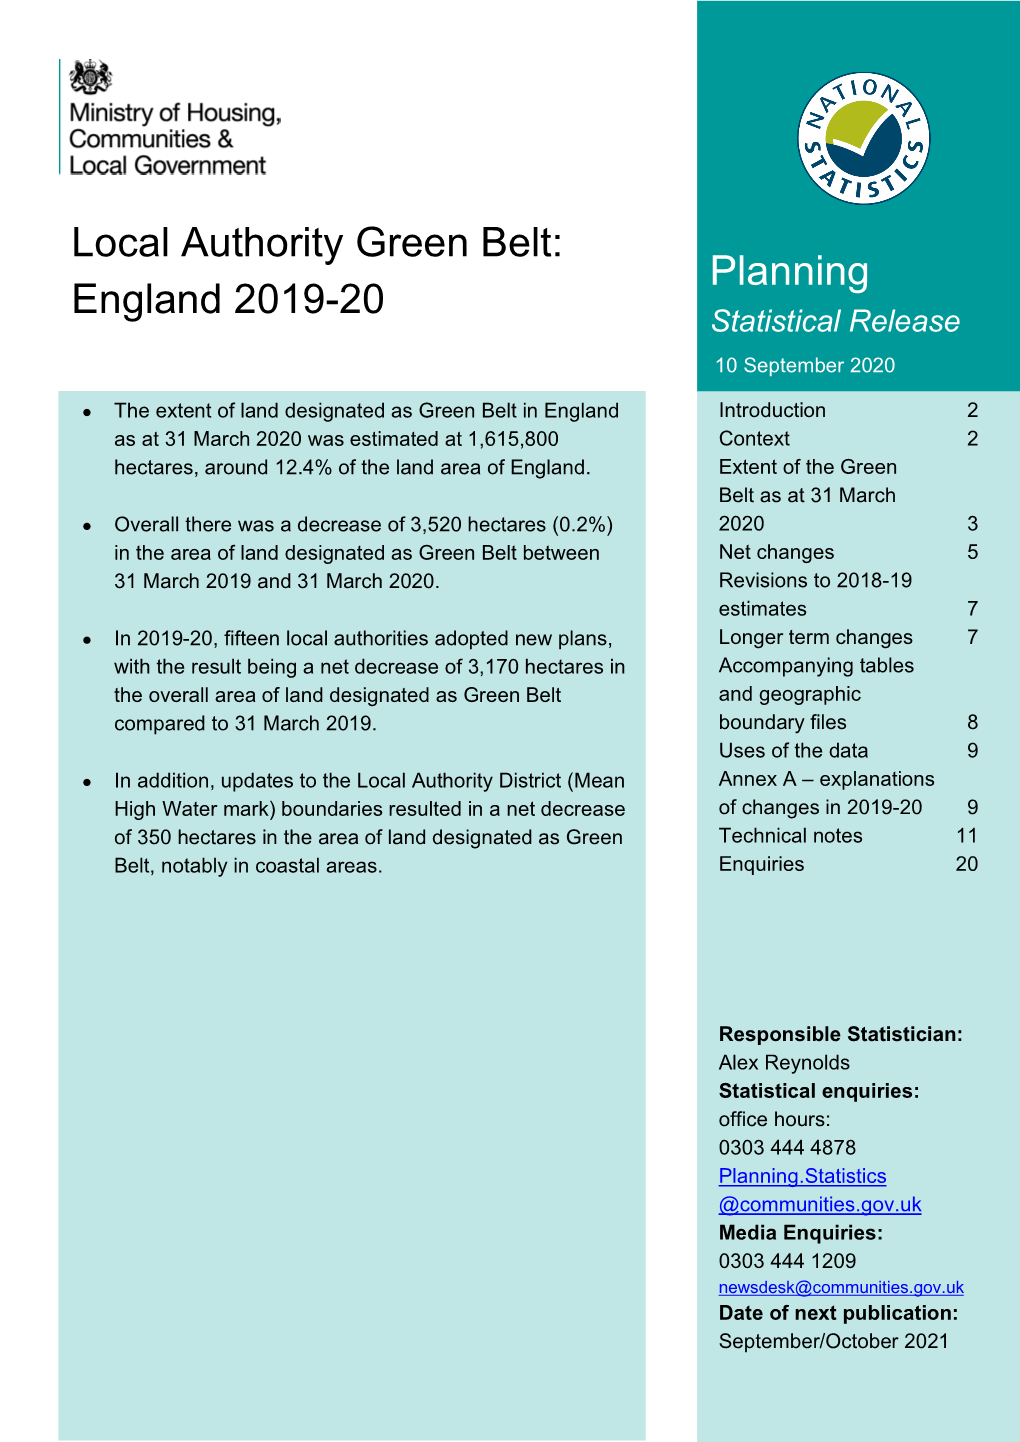 Local Authority Green Belt: Planning